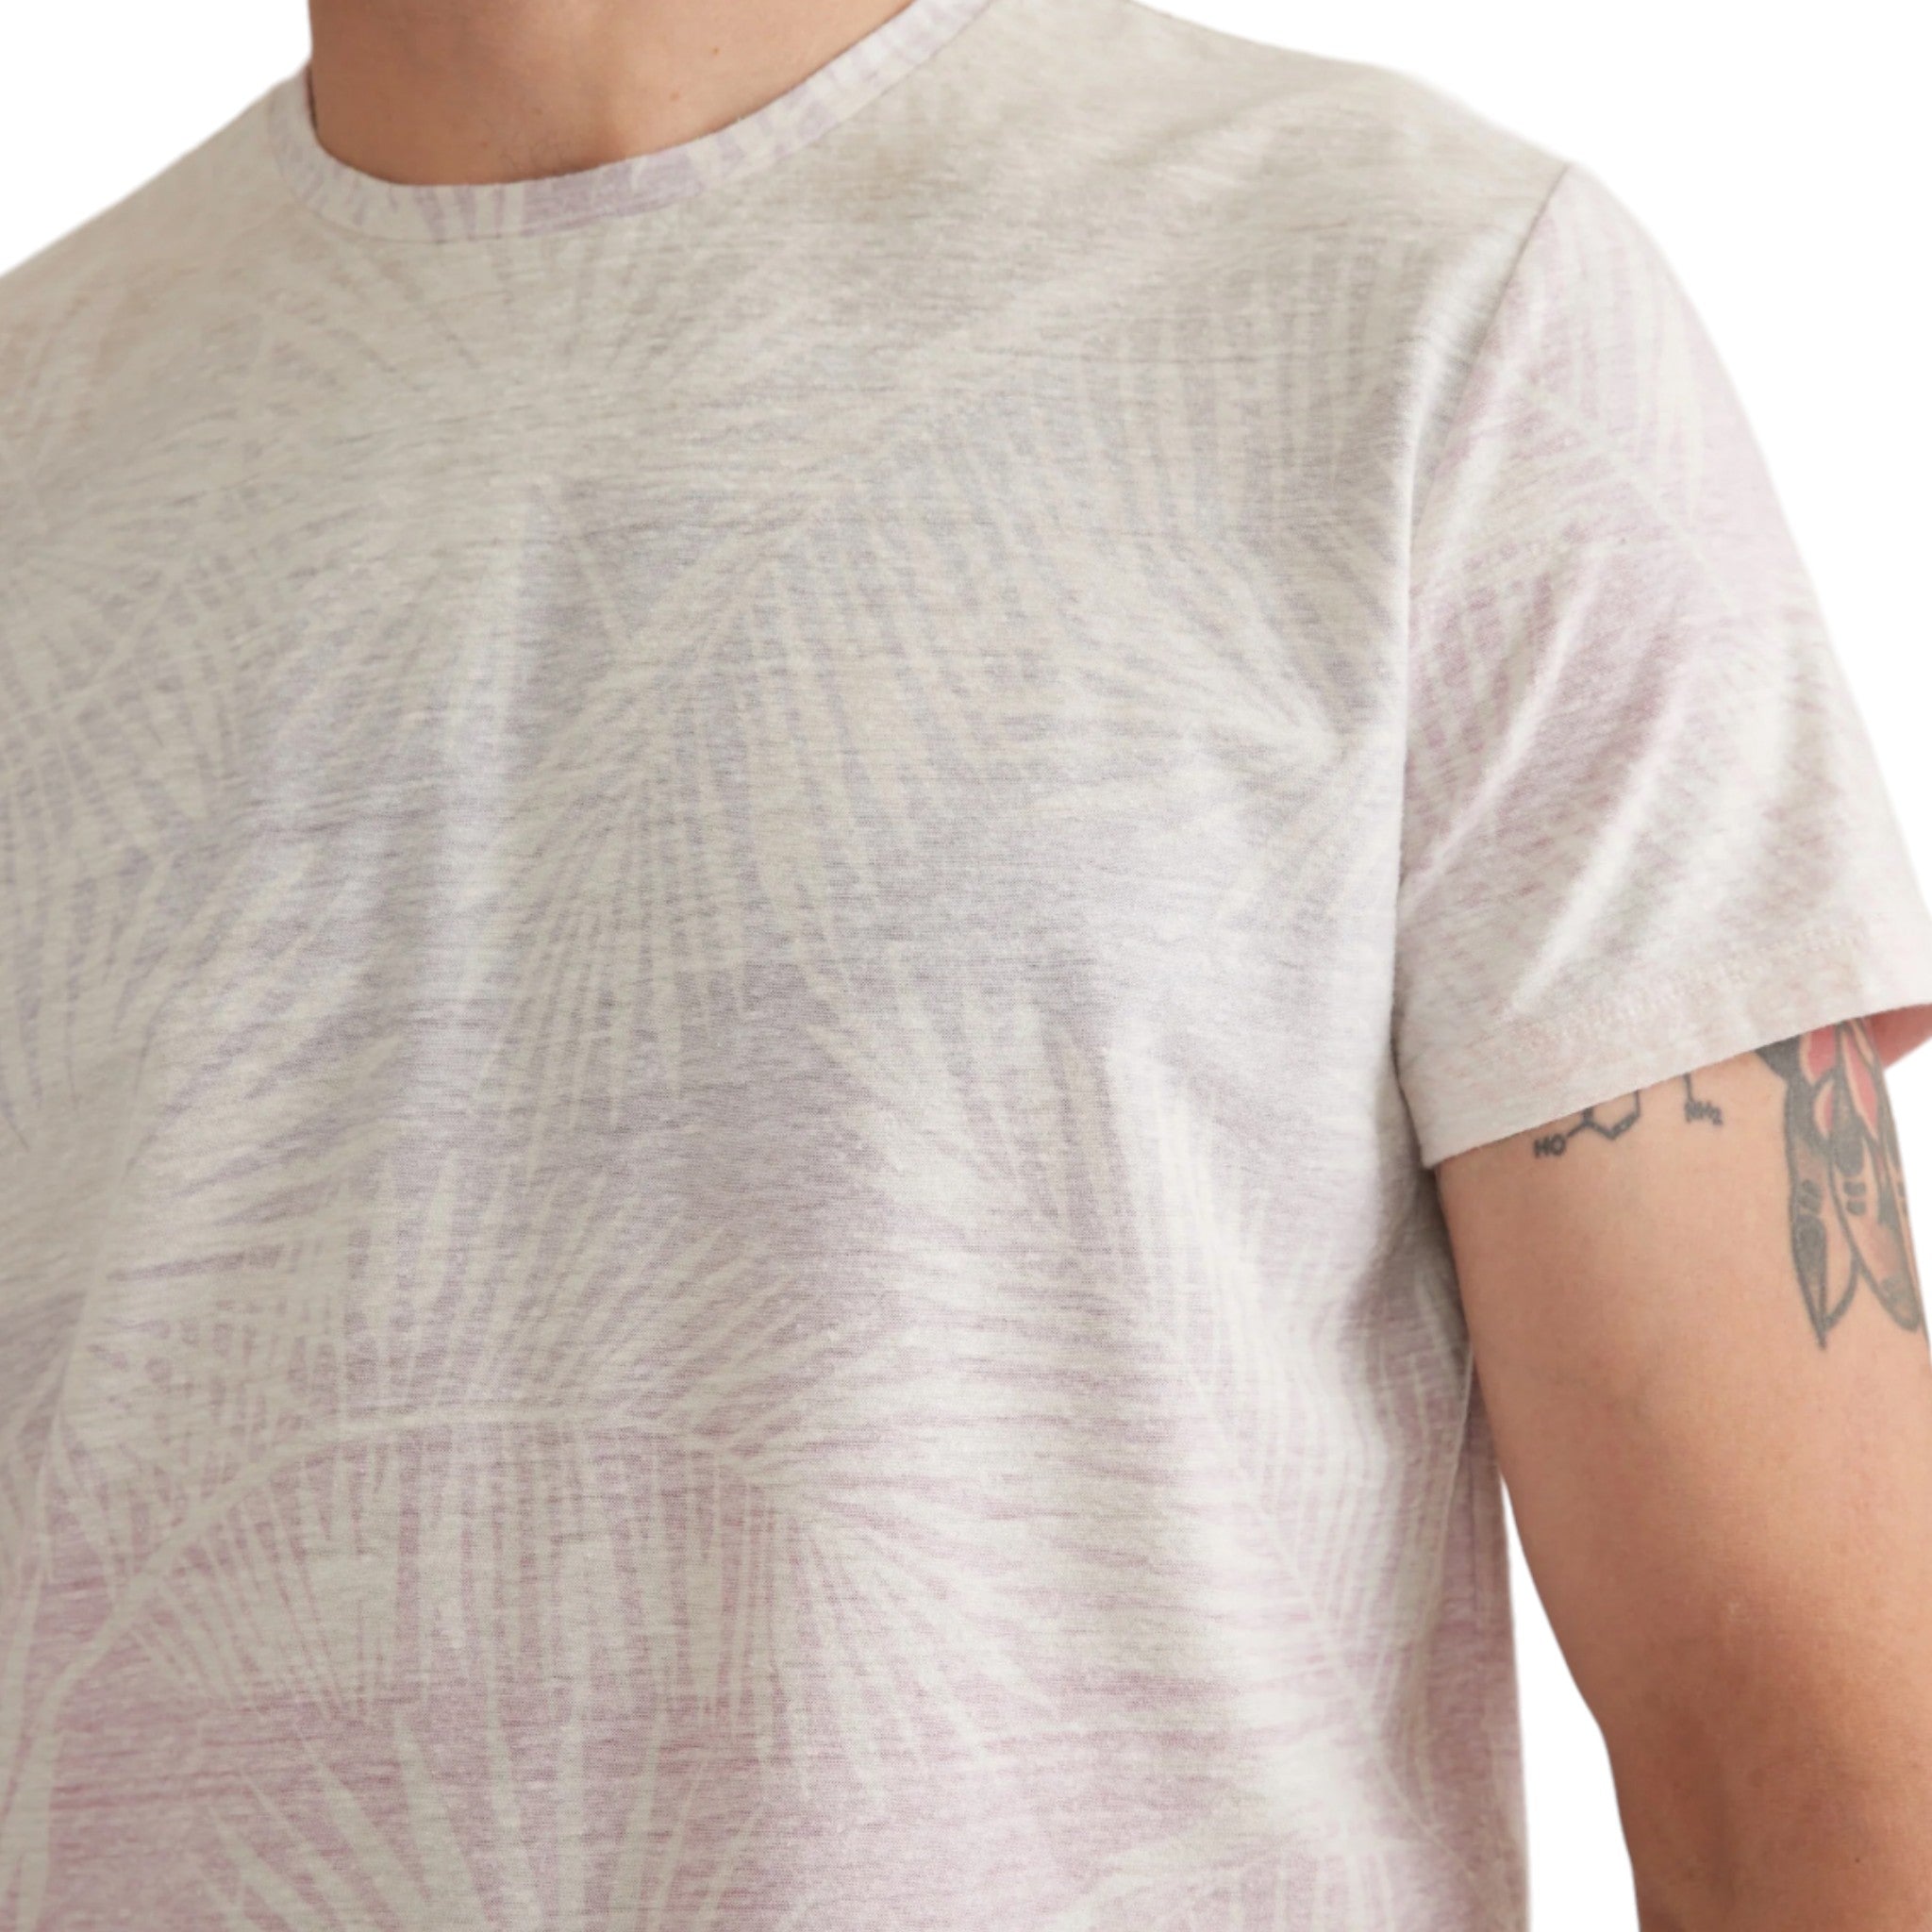 Marine Layer - All Over Graphic Signature Crew Tee - Ombre Palm